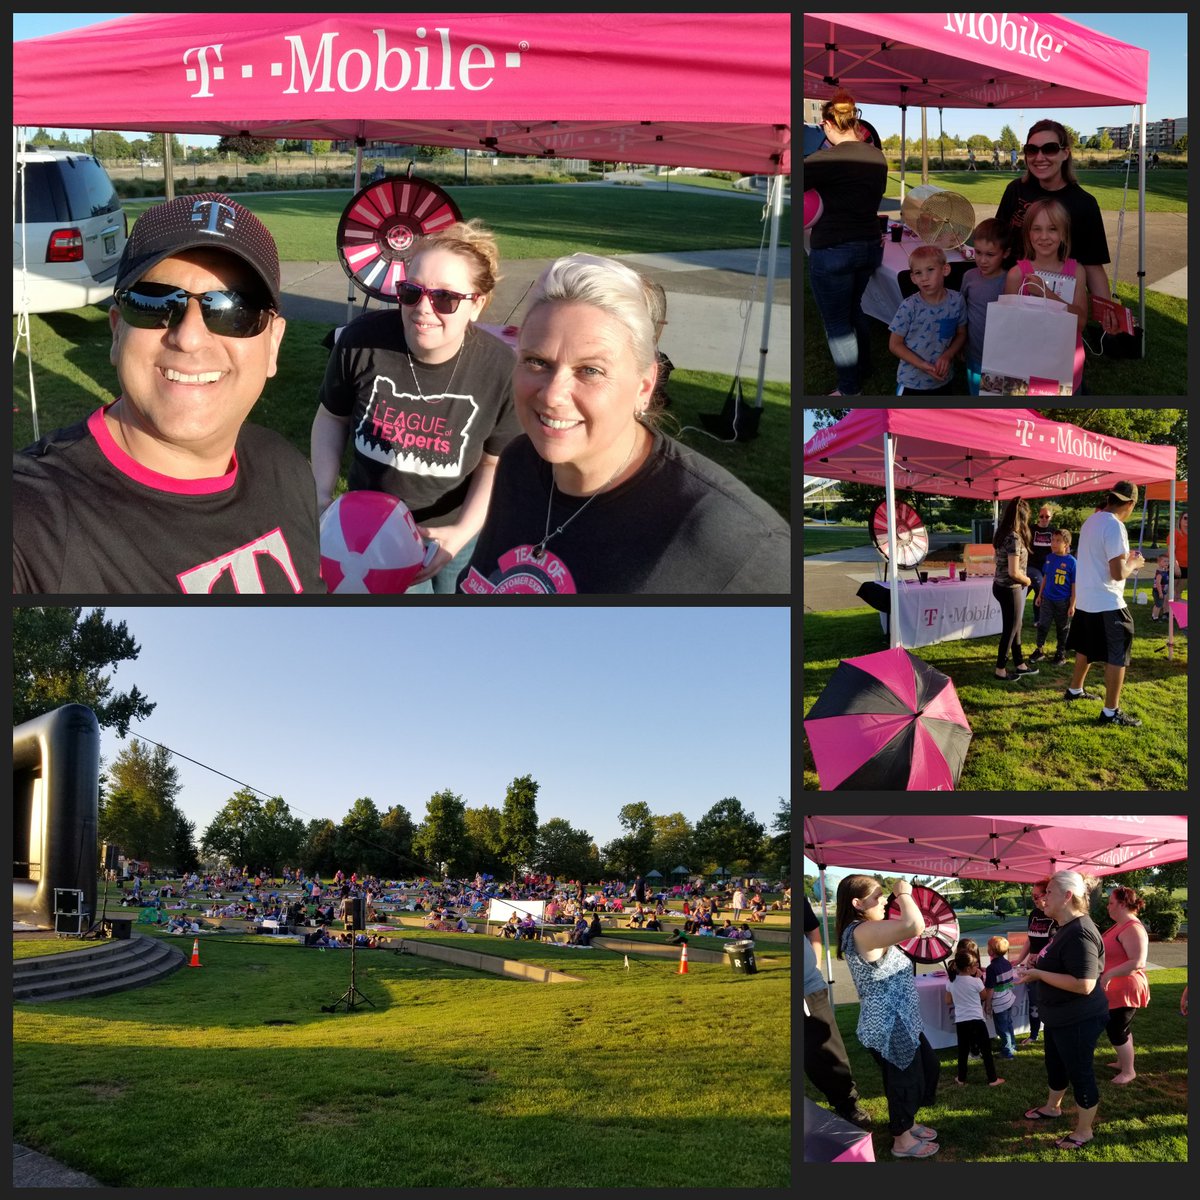 #moviesinthepark is a HUGE hit!! The Salem community loves @TMobile !! It's Awesome that we were able to sponsor this event for our community!! @tomjyang @btb503 @shawnals1 @enriquez_shanda